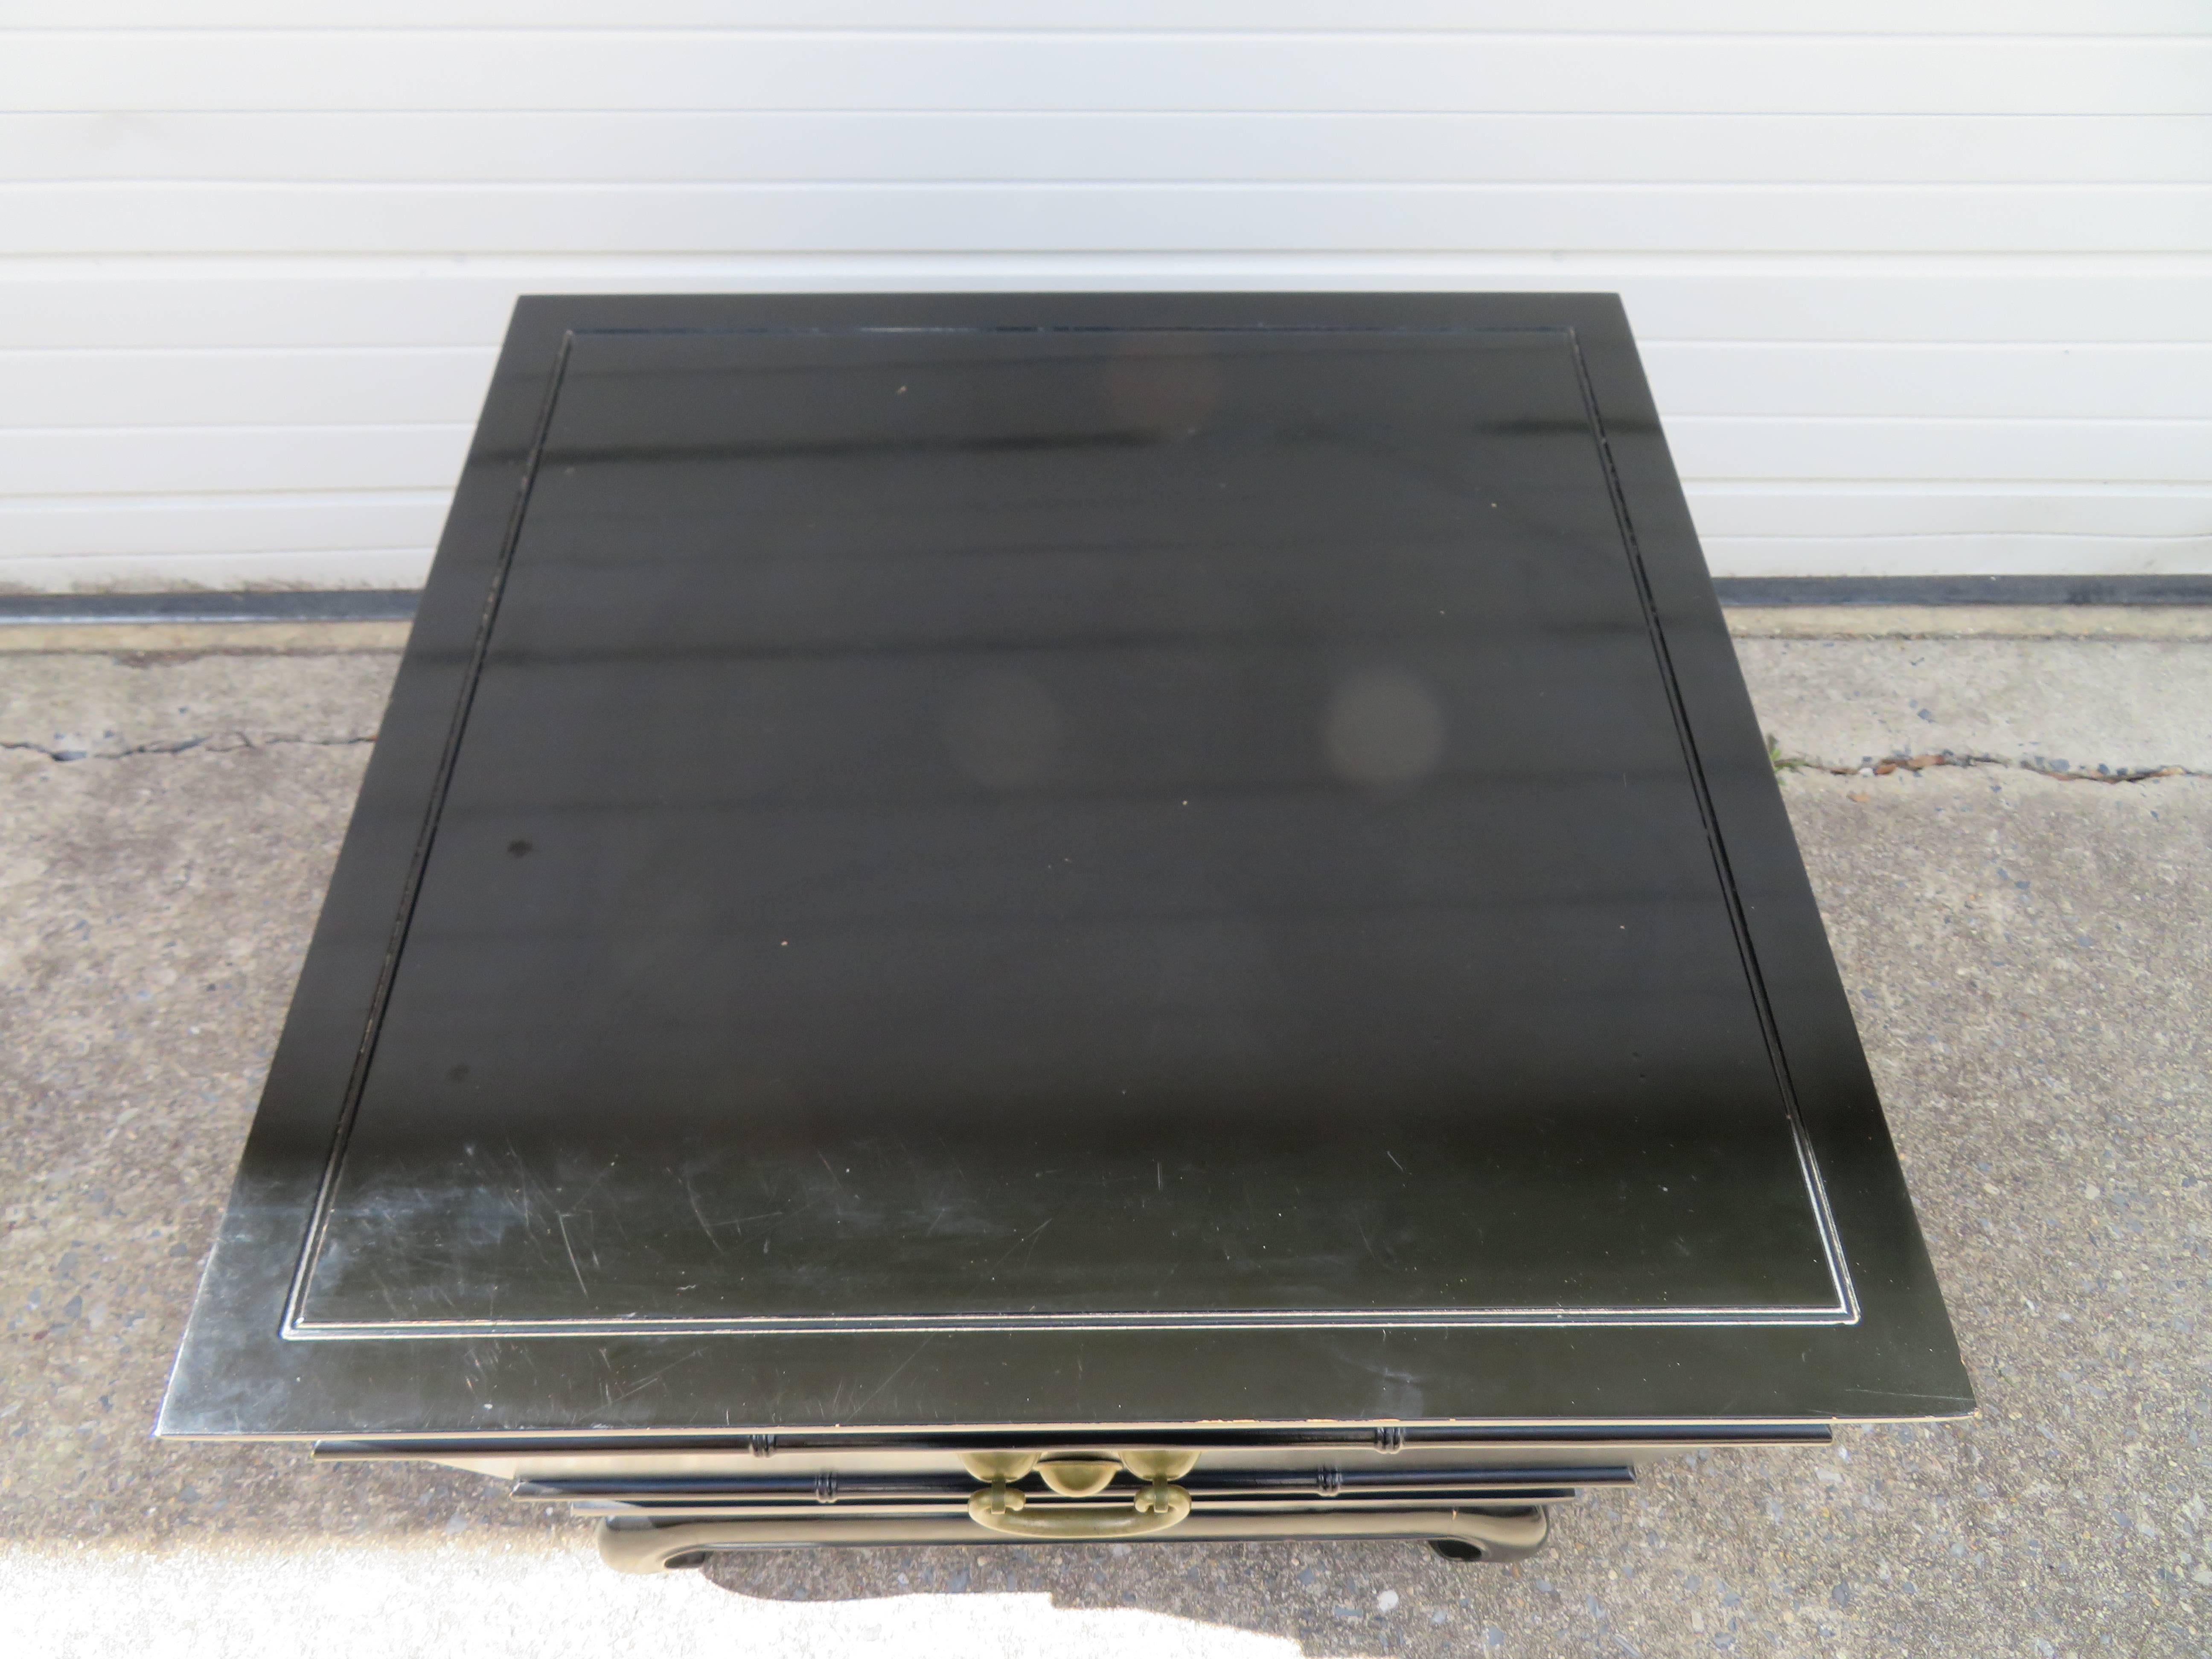 Fantastic chinoiserie style black lacquered Lane end table with hidden pull down door. The nicely concealed door flips down revealing a black formica desktop-great space to set some snacks or drinks and inside an open space for magazines. We love